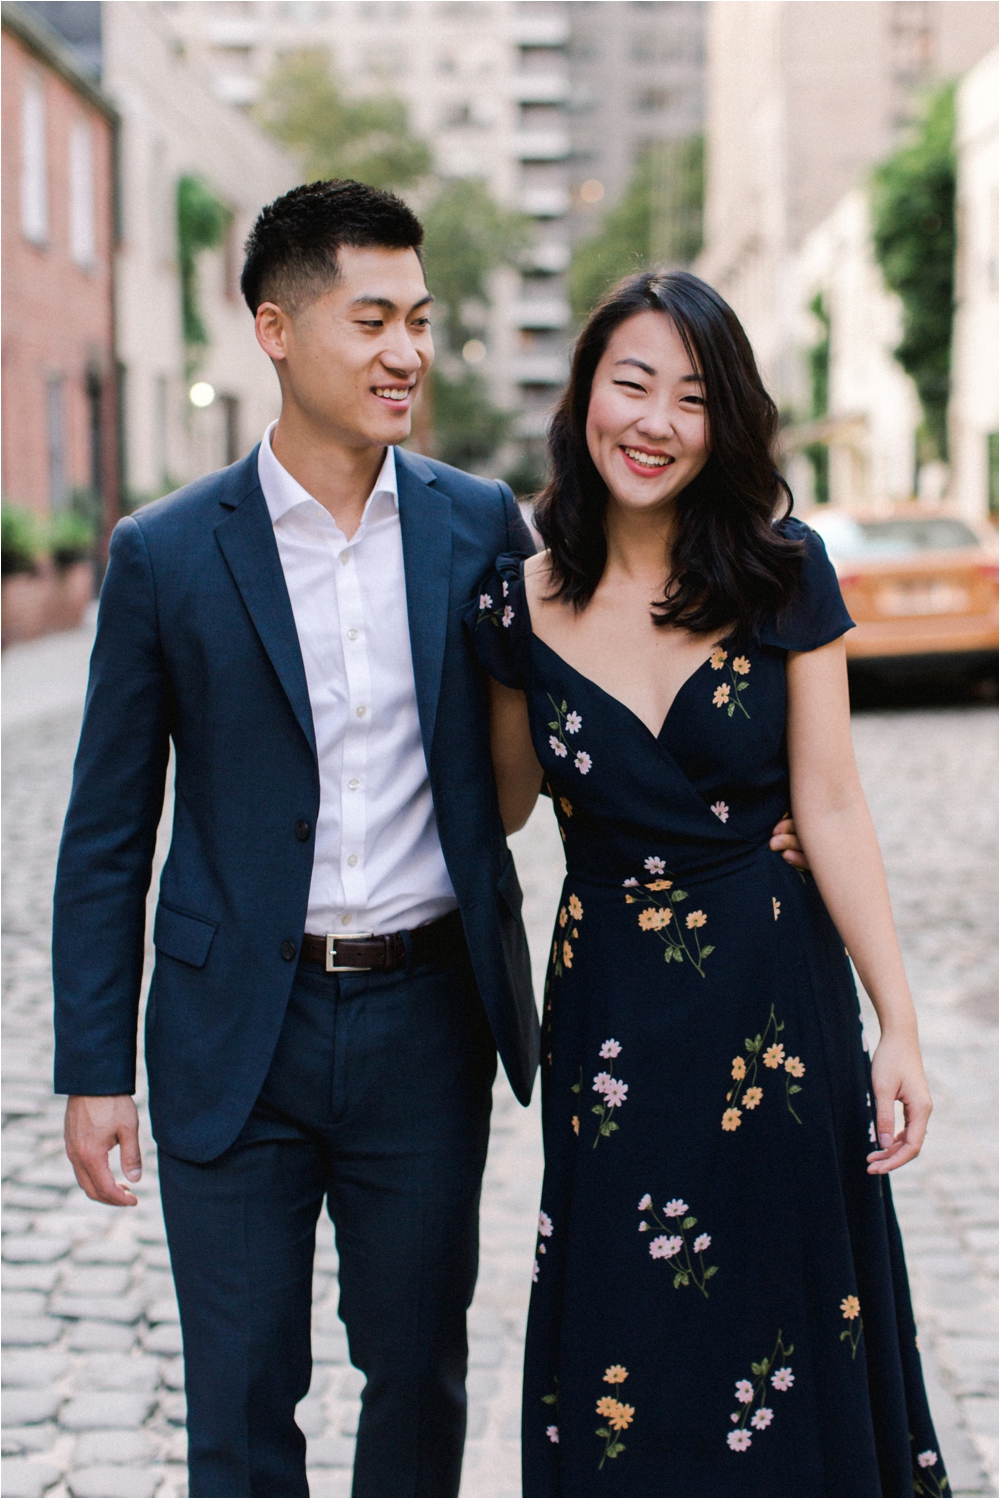 Engagement Session at the Washington mews in new york city